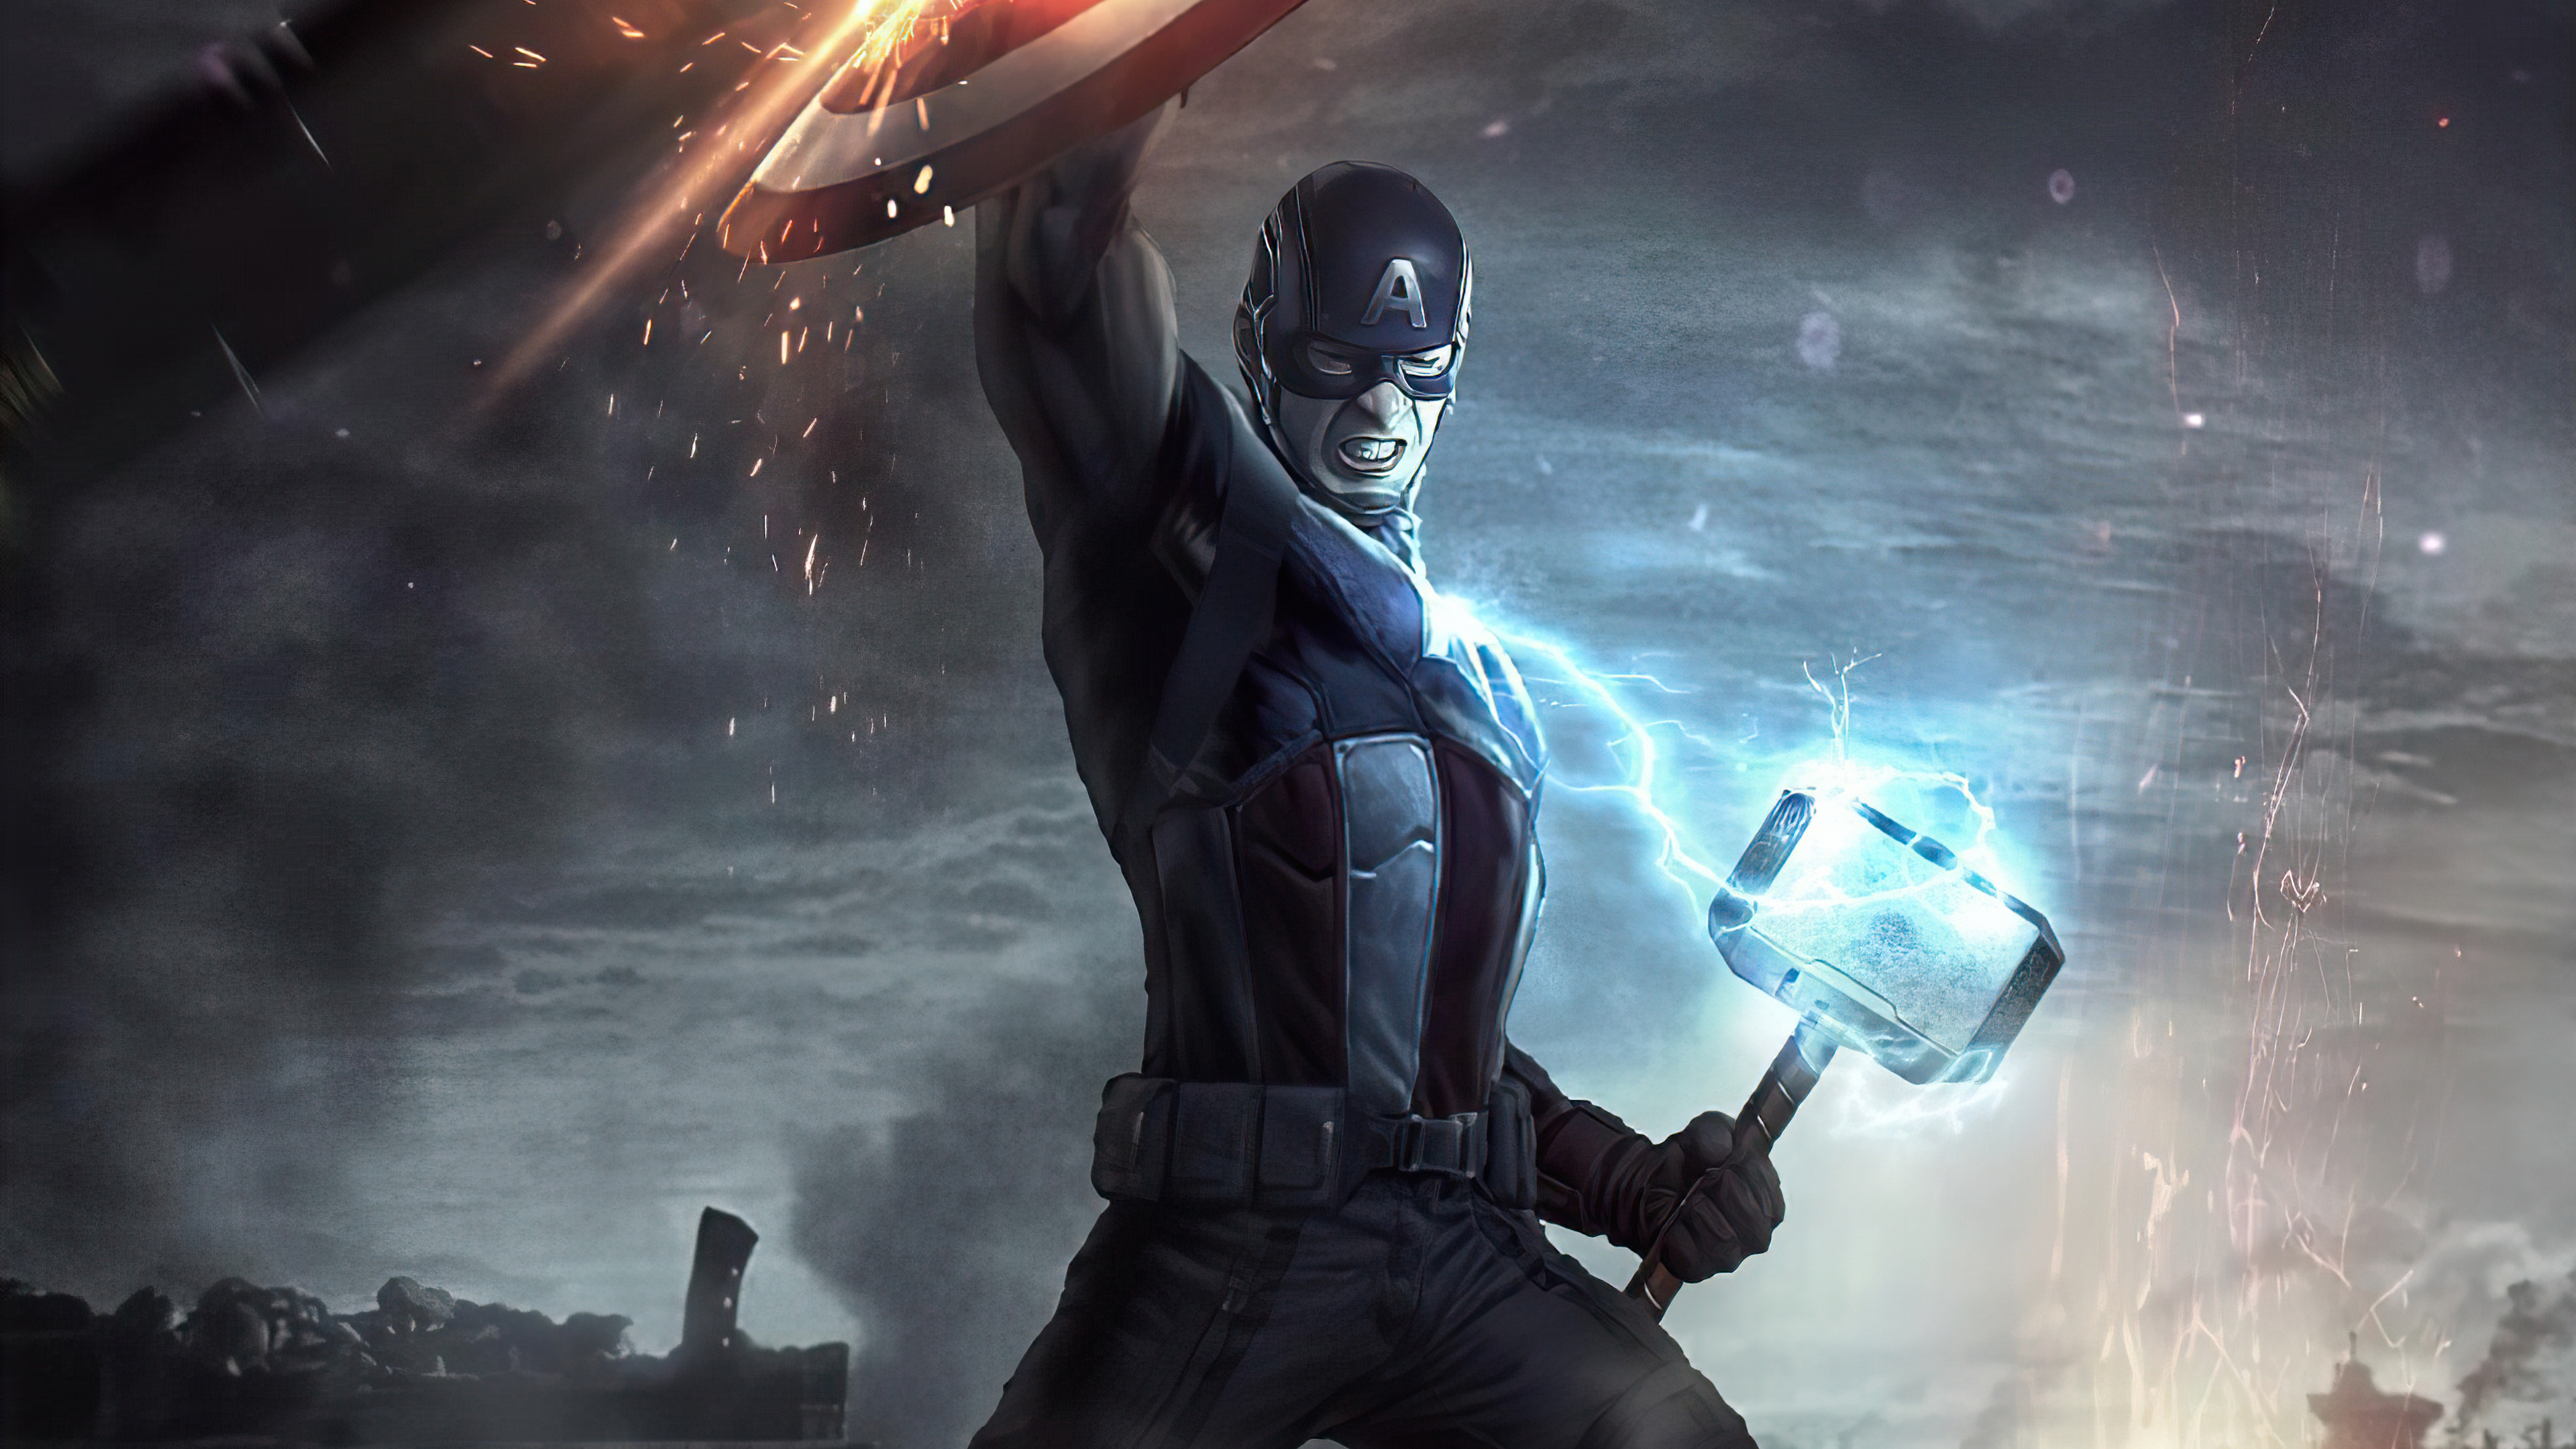 Captain America with Thor's hammer 2020 Wallpaper 4k Ultra HD ID:6413